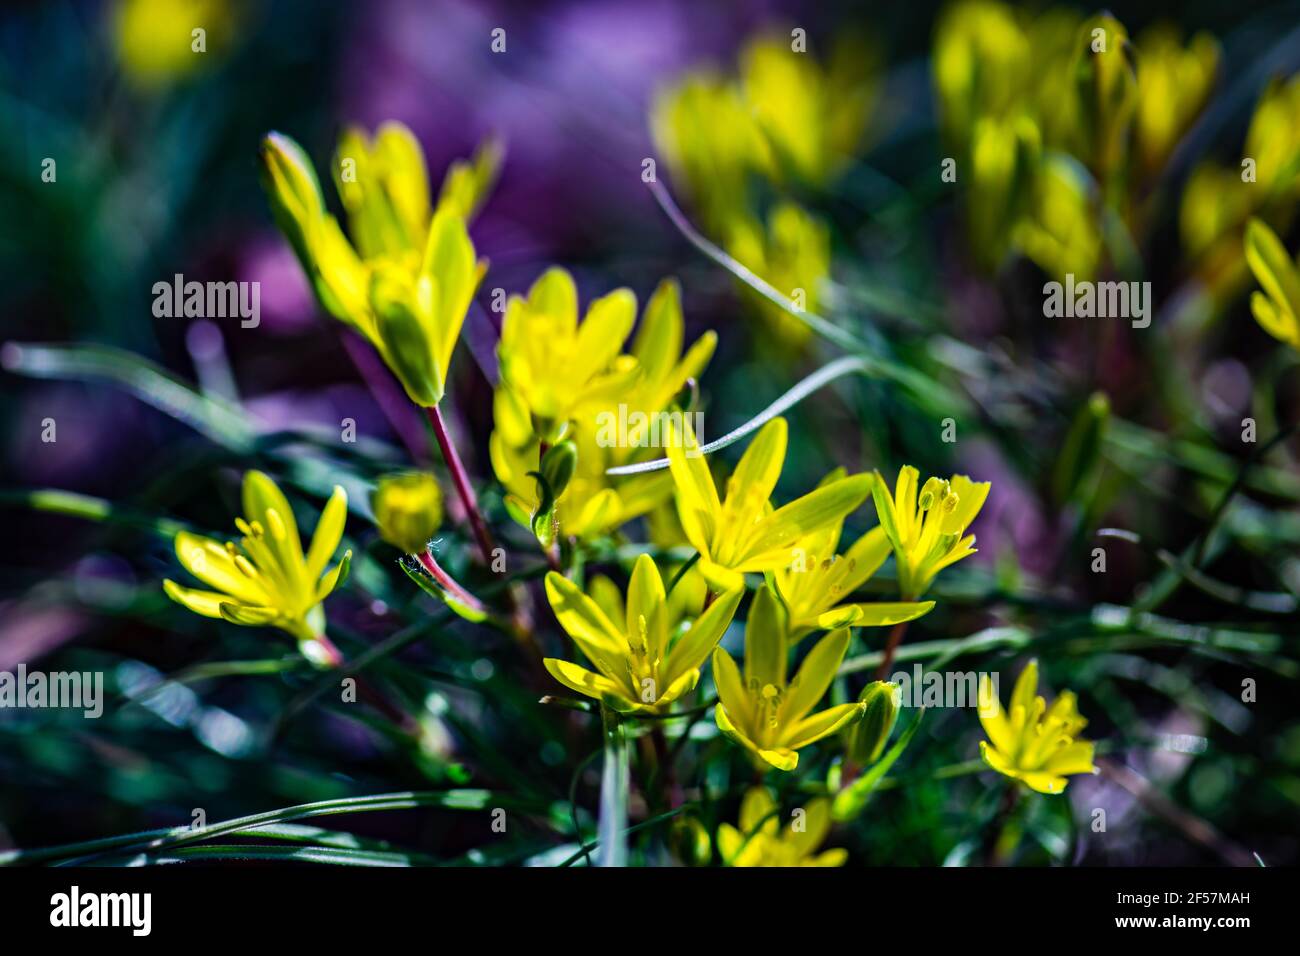 The Yellow star-of-Bethlehem flower in woodland on defocused background Stock Photo